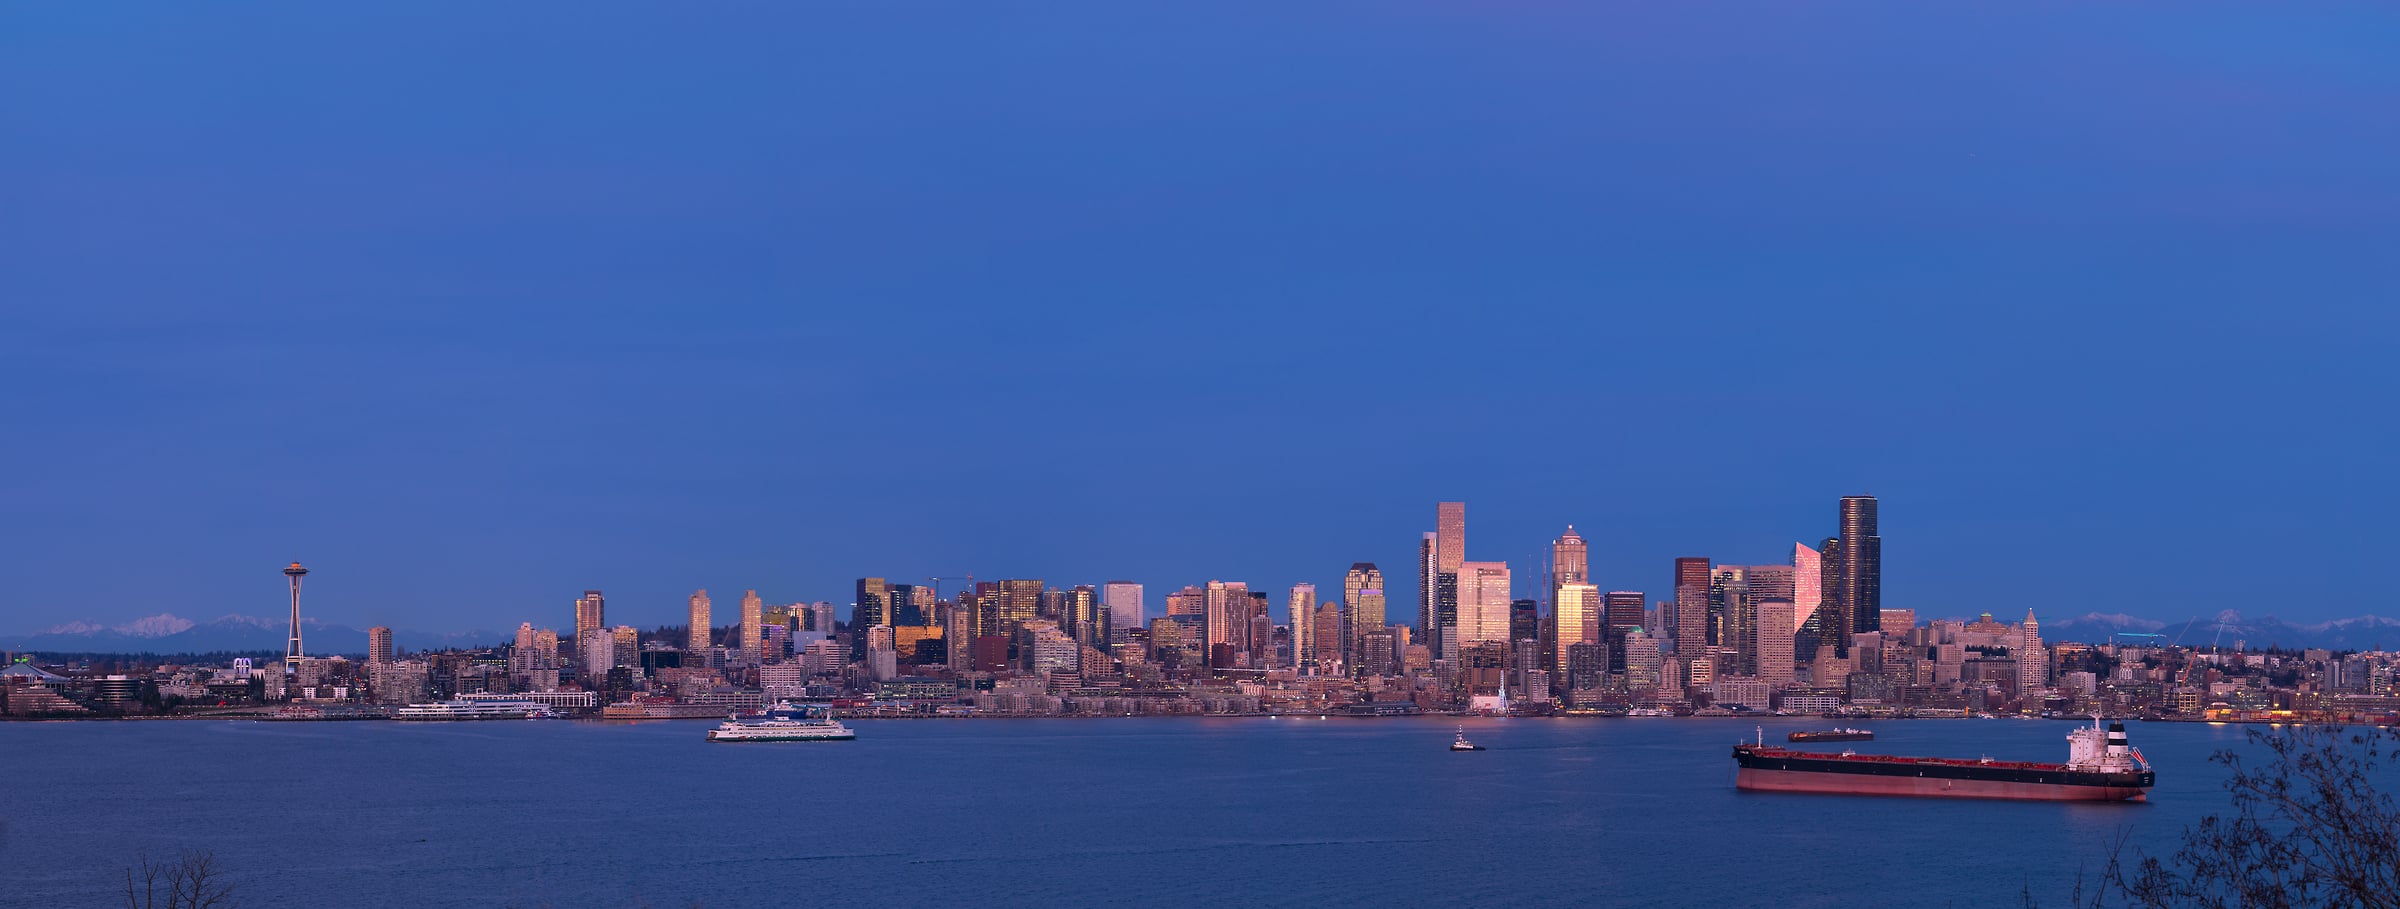 284 megapixels! A very high resolution, large-format VAST photo print of the Seattle skyline at sunset with Elliott Bay in the foreground; cityscape photograph created by Greg Probst in Seattle, Washington.